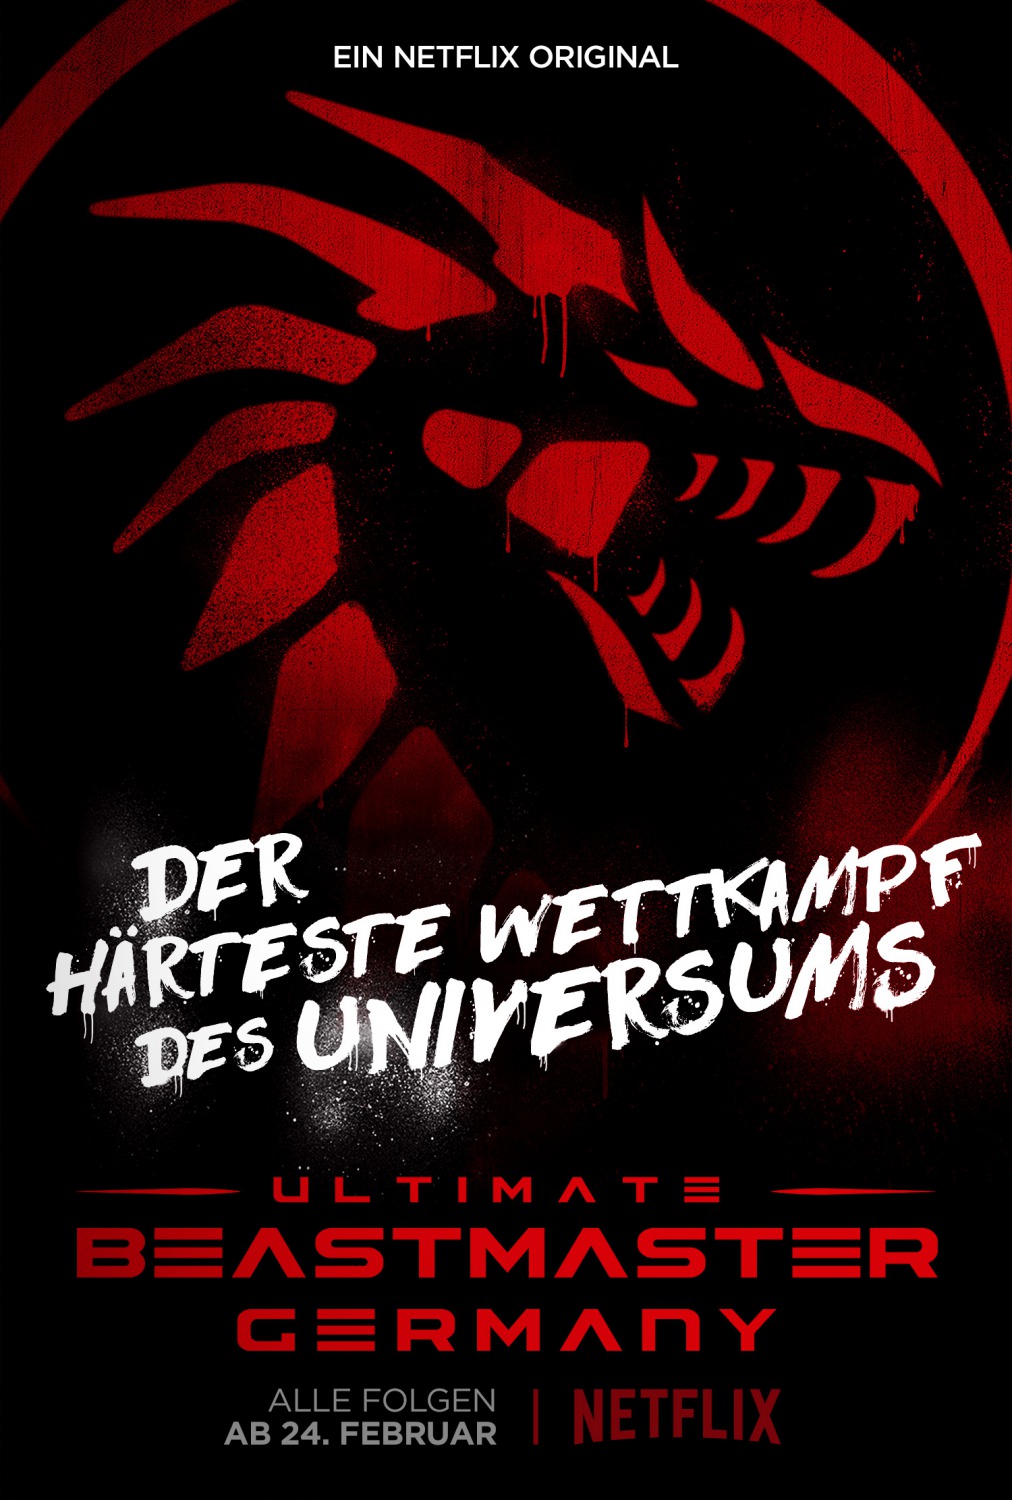 Extra Large TV Poster Image for Ultimate Beastmaster (#2 of 2)